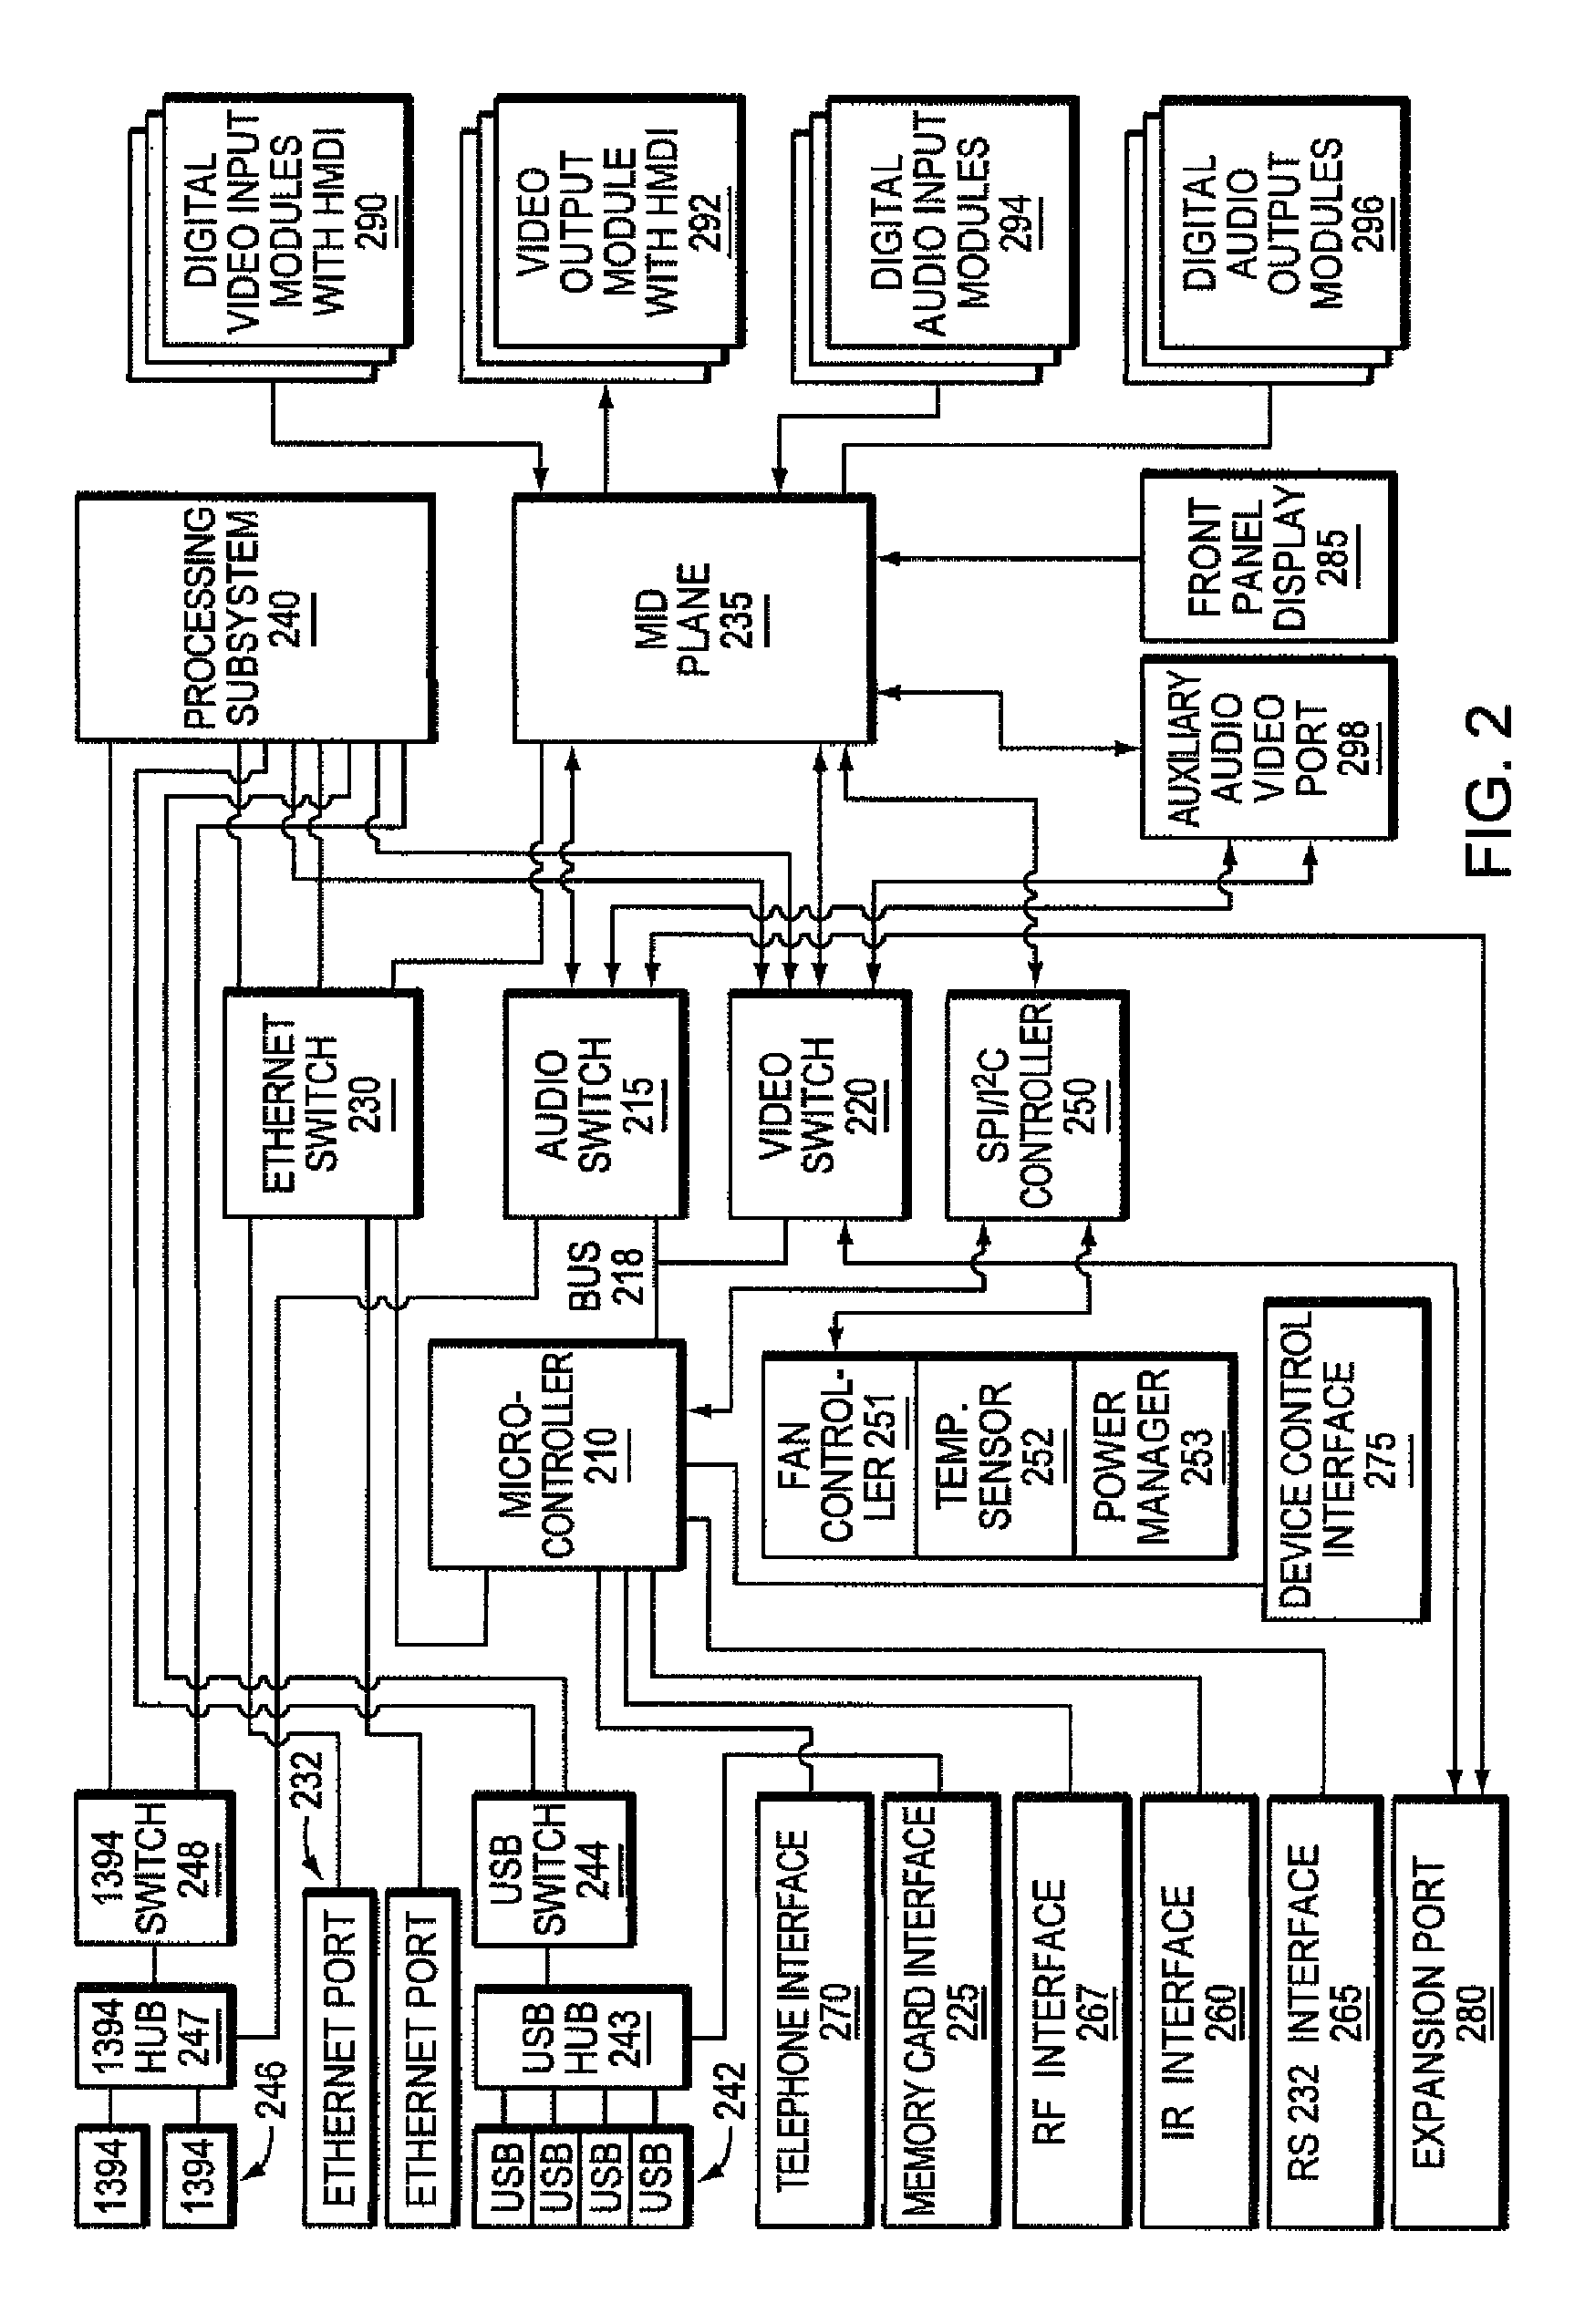 Remote control unit for a programmable multimedia controller